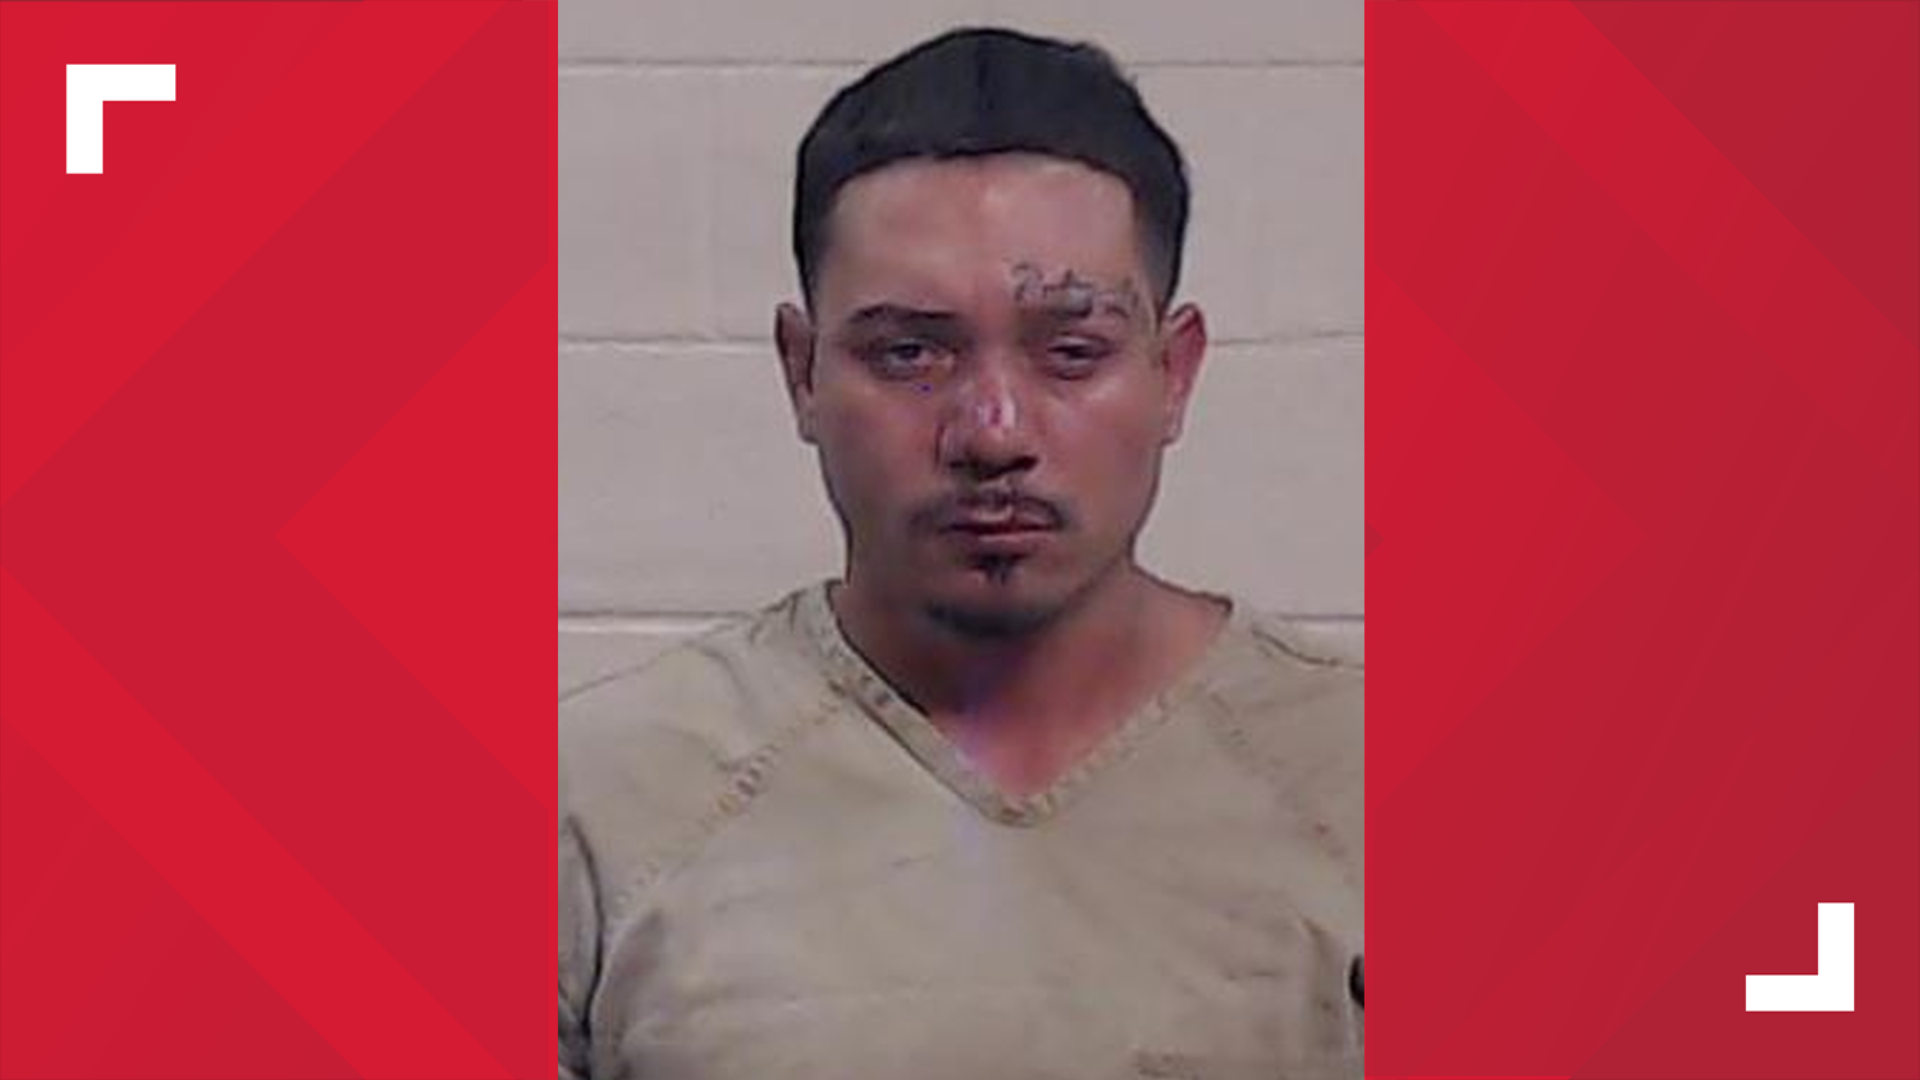 Police say Leo Andre Flores was intoxicated and driving a stolen vehicle at the time of the crash.